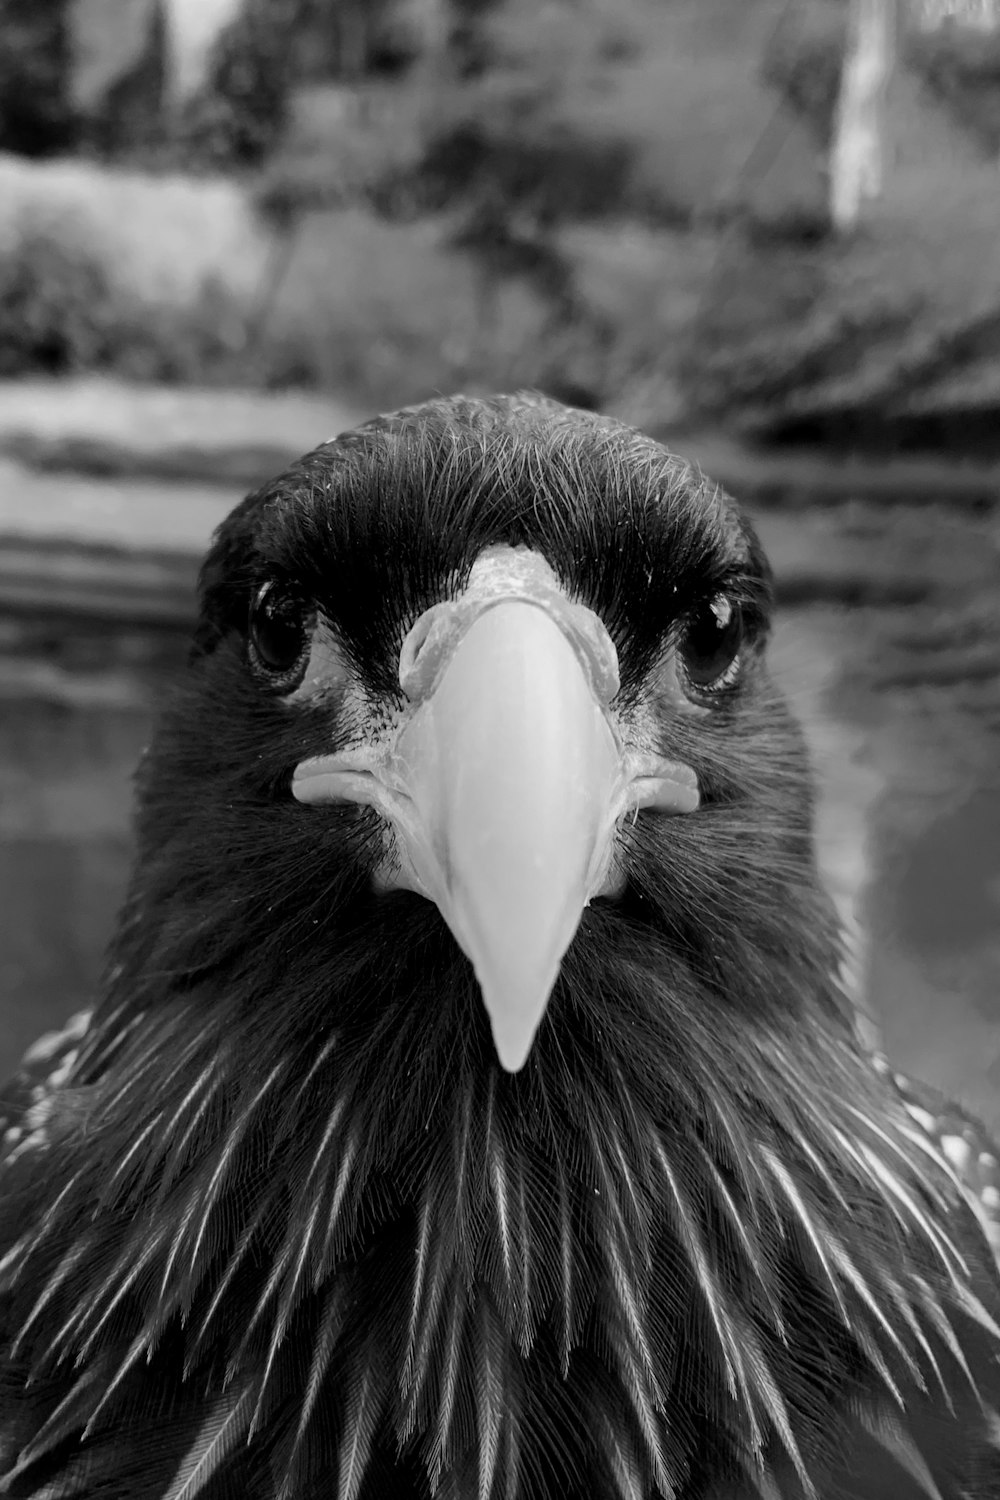 a black and white photo of a bird